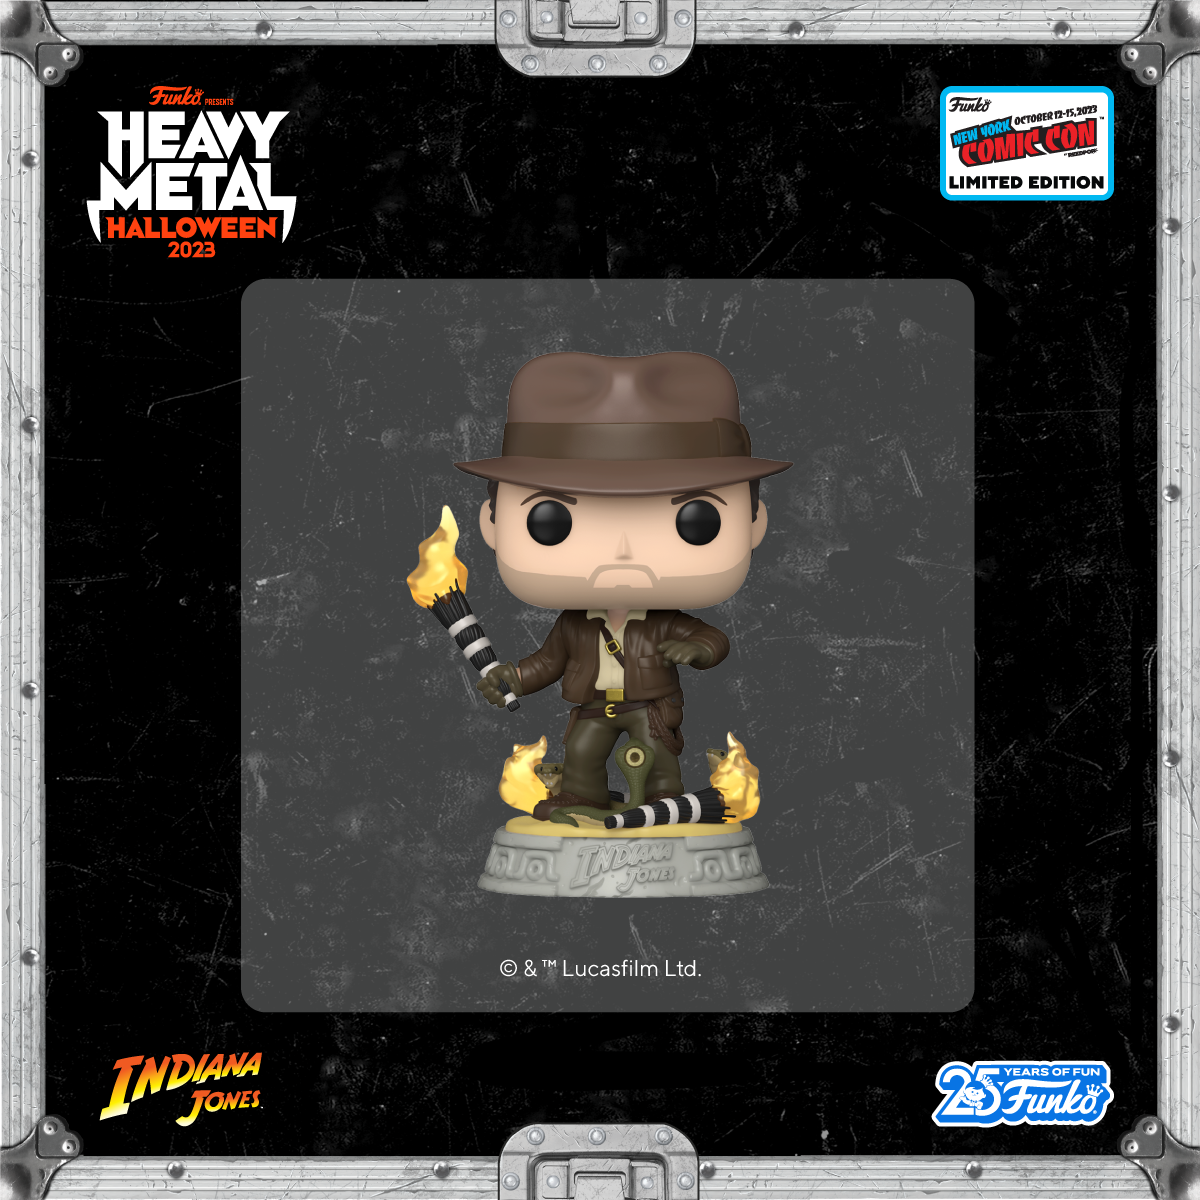 New York Comic Con exclusive Pop! Indiana Jones™ (with snakes) is here to shake, rattle, and roll into your Indiana Jones collection.